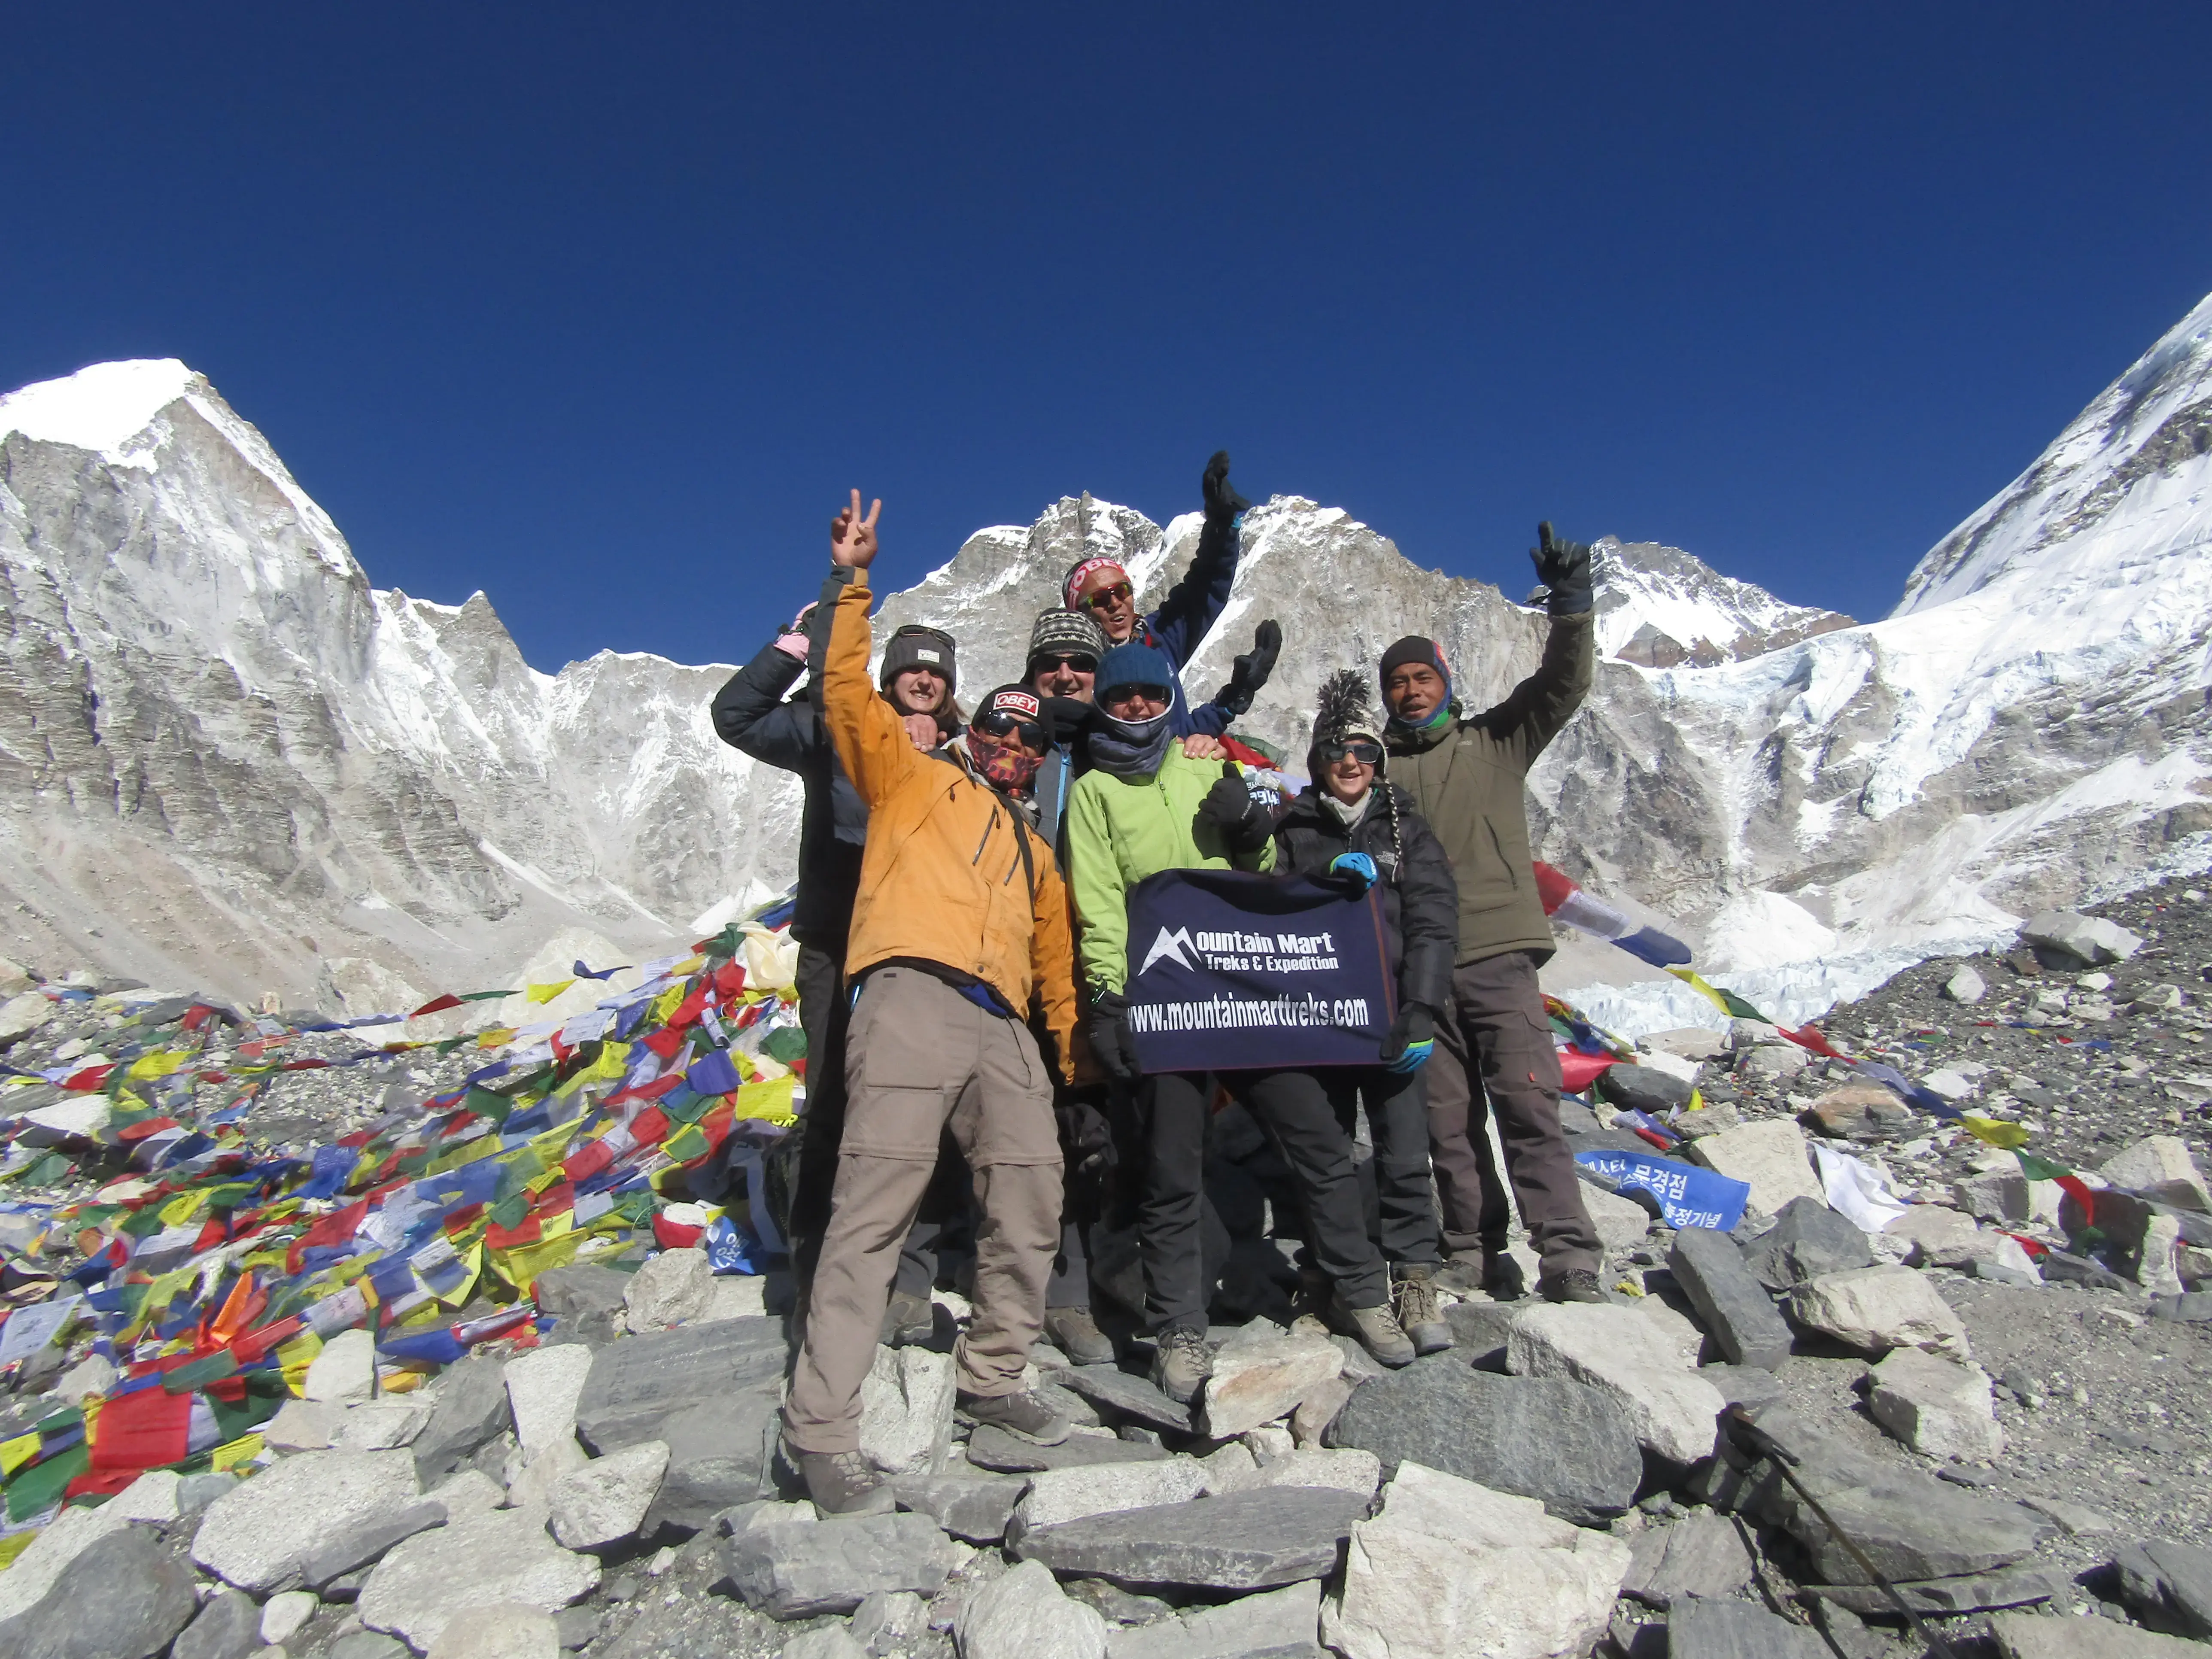 What makes the Everest Base Camp Trek difficult?